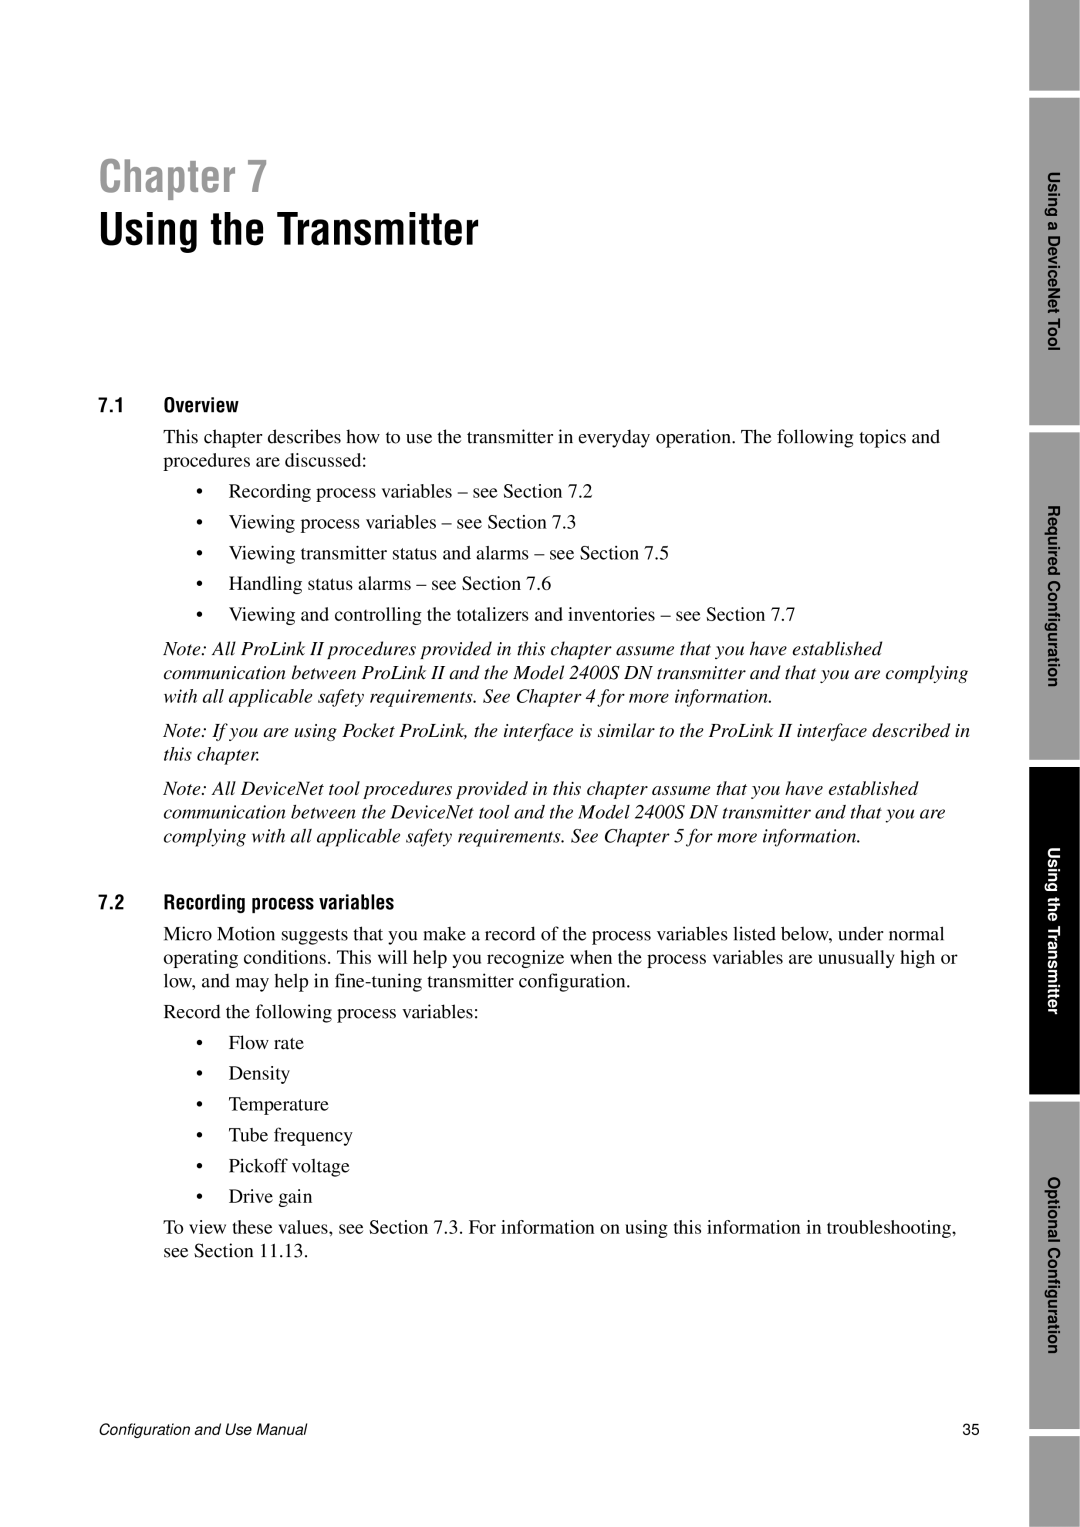 Emerson Process Management 2400S manual Using the Transmitter, Chapter, 7.1Overview, 7.2Recording process variables 